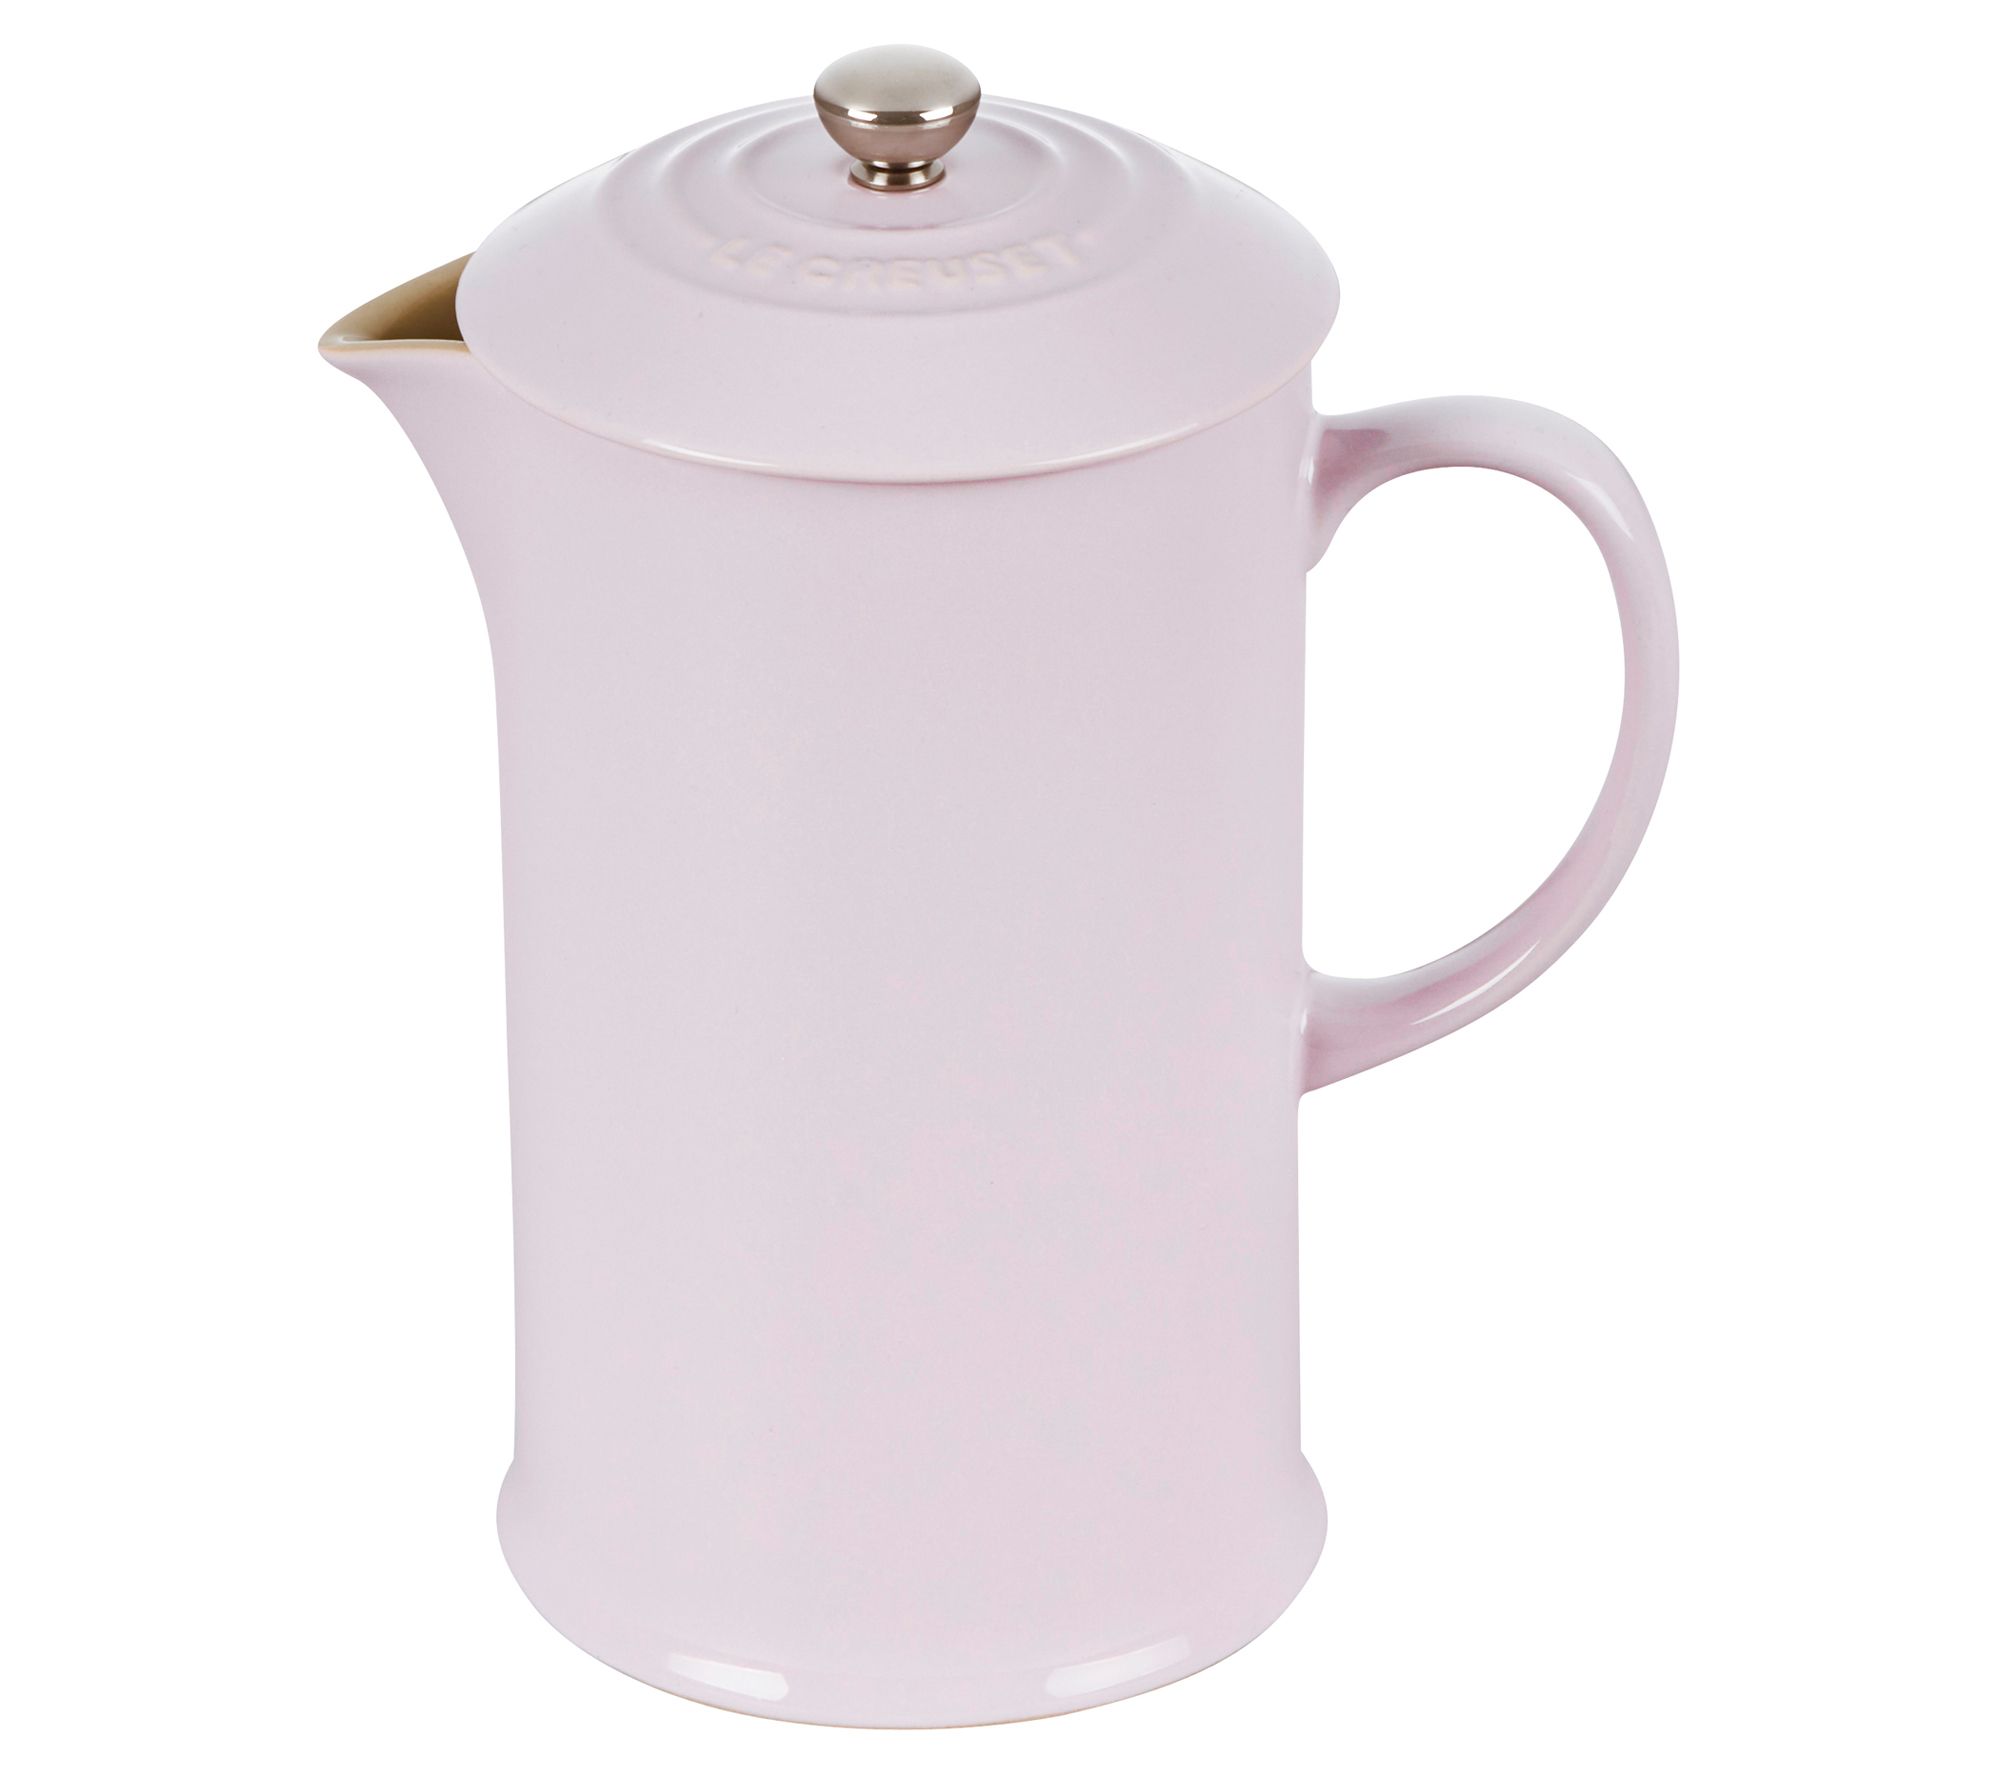 Le Creuset French Press - Today's Bride